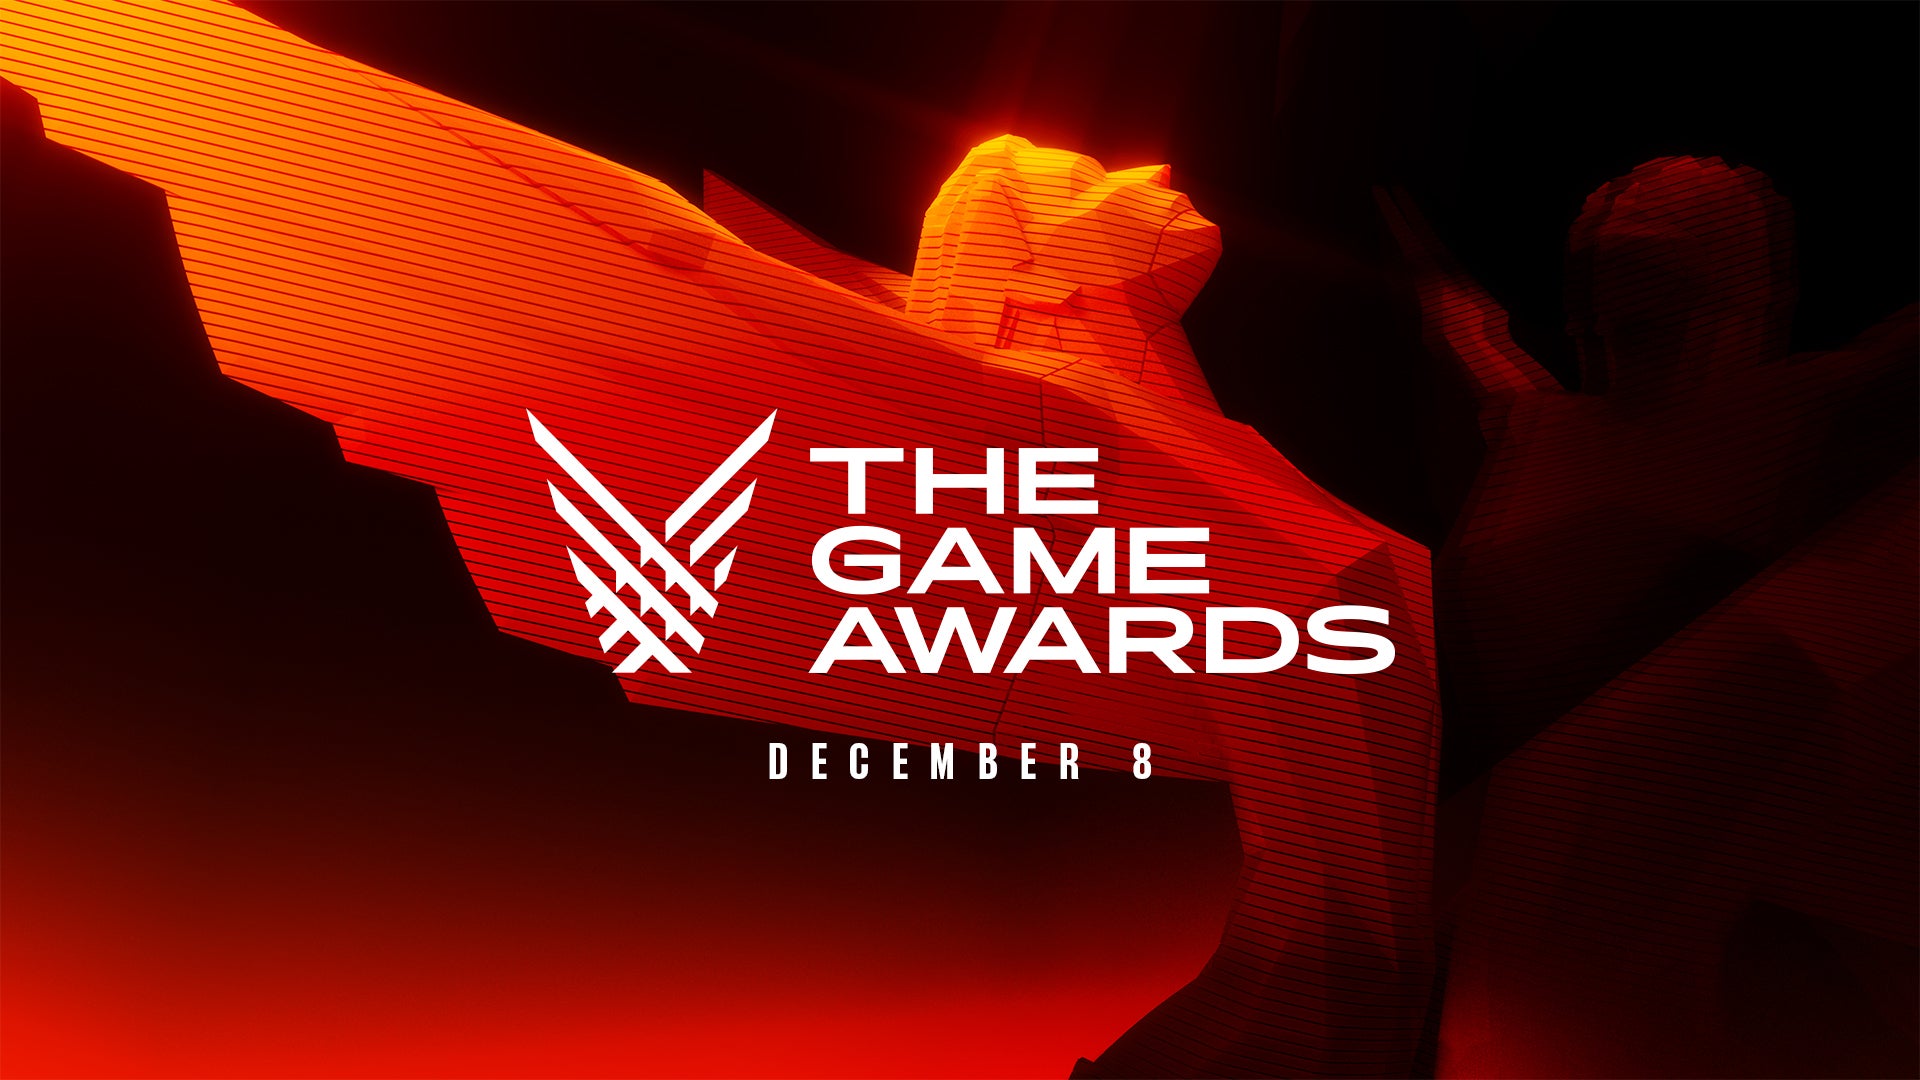 The Game Awards 2022 logo over a stylised image of the TGA trophy design.